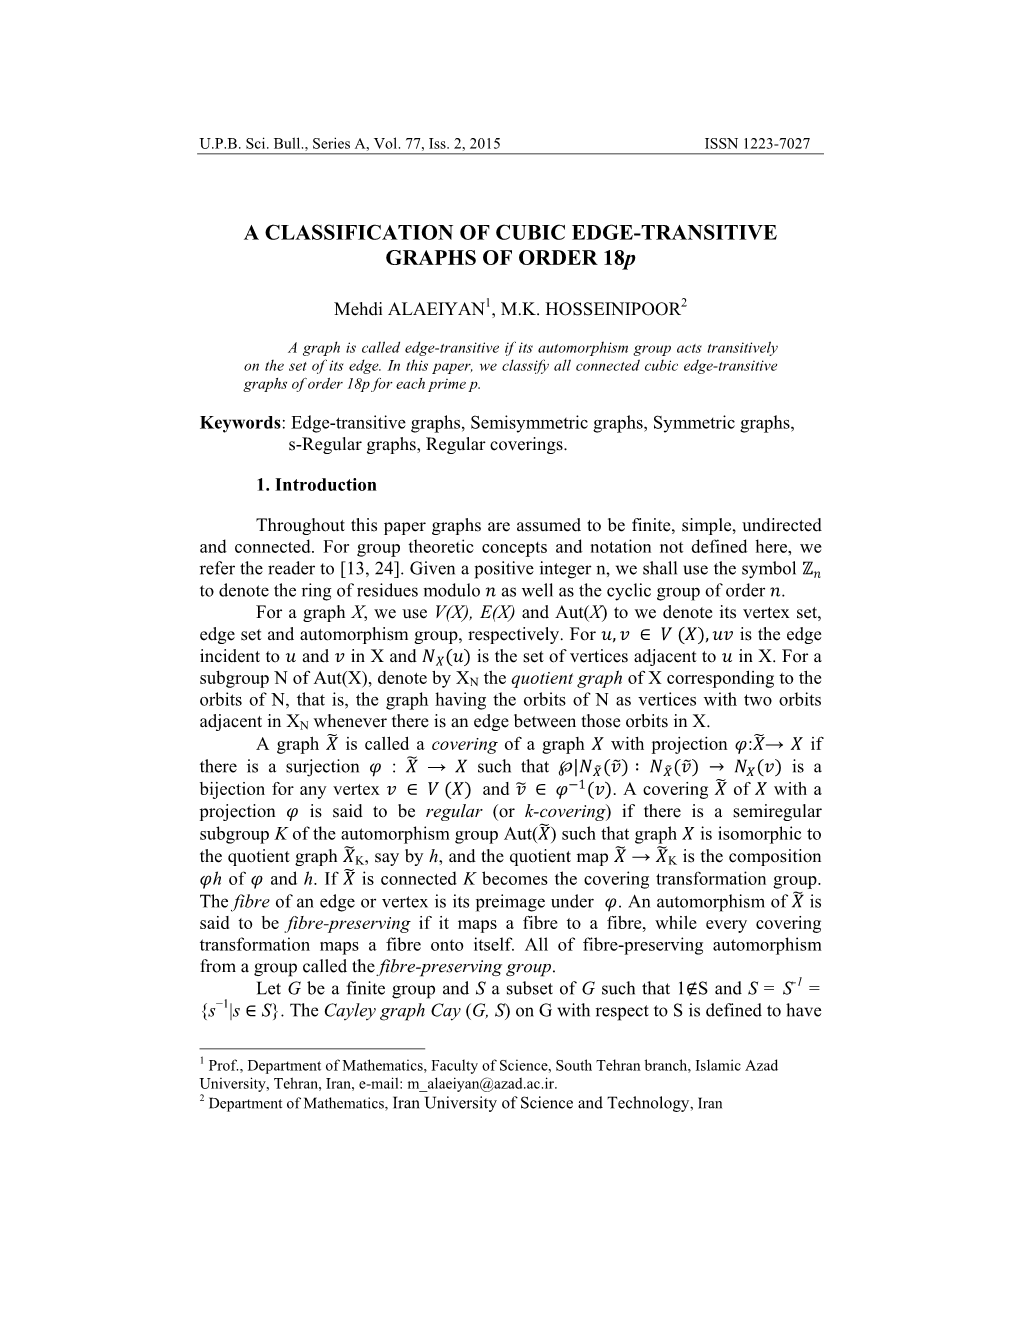 A CLASSIFICATION of CUBIC EDGE-TRANSITIVE GRAPHS of ORDER 18P